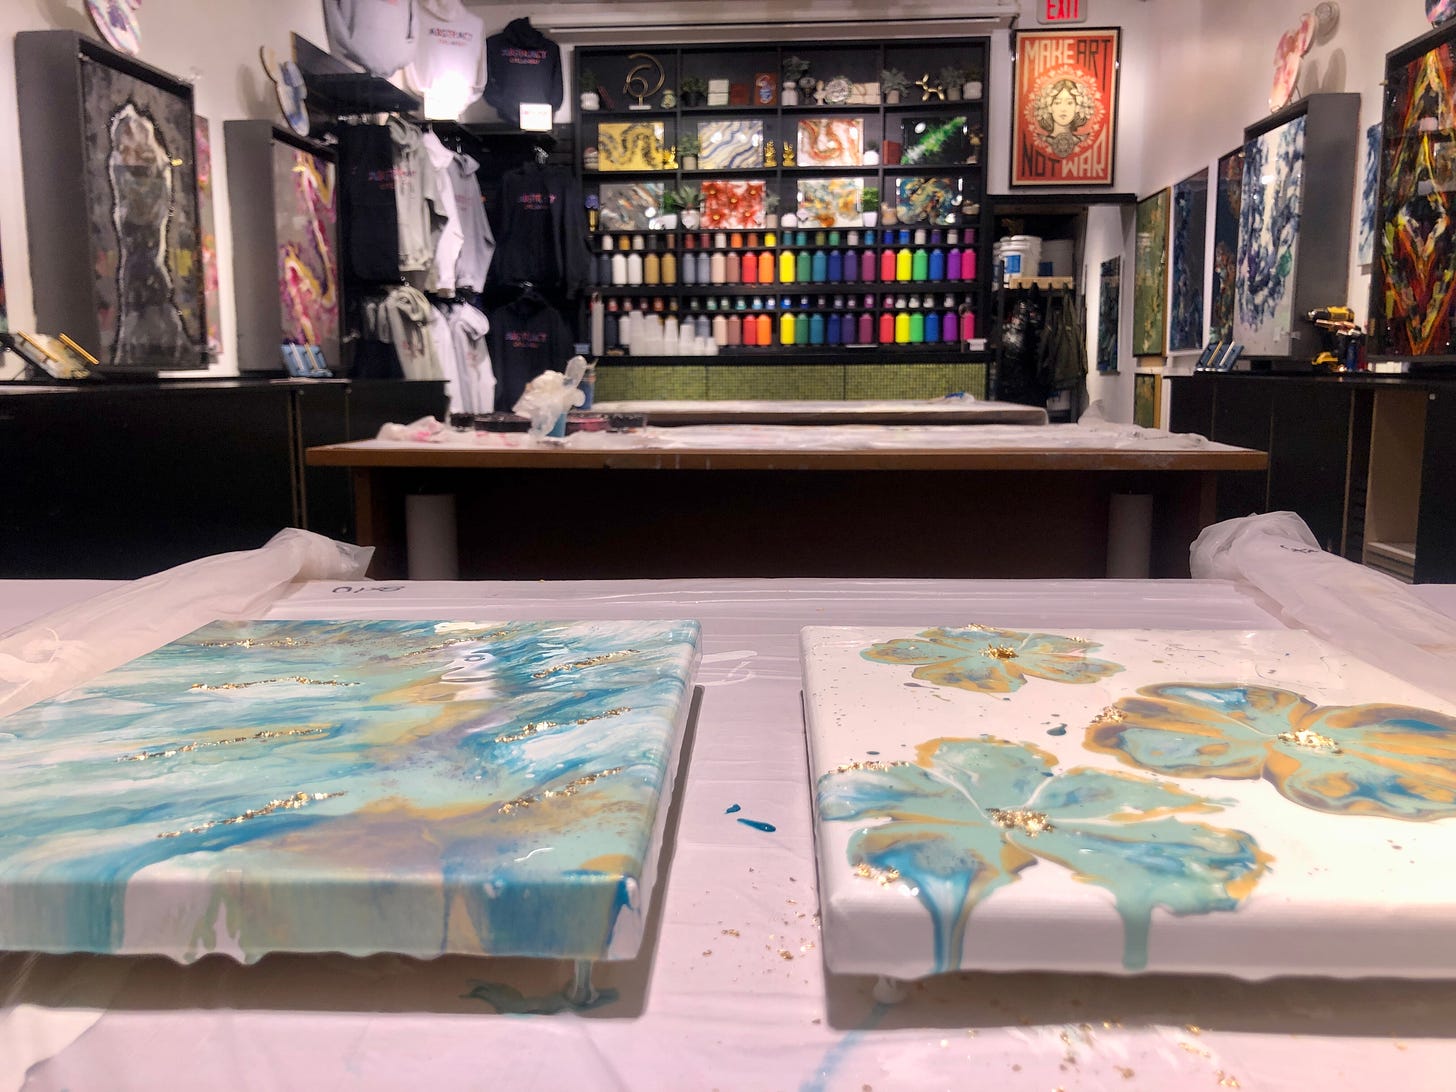 Fluid art studio with two finished projects.